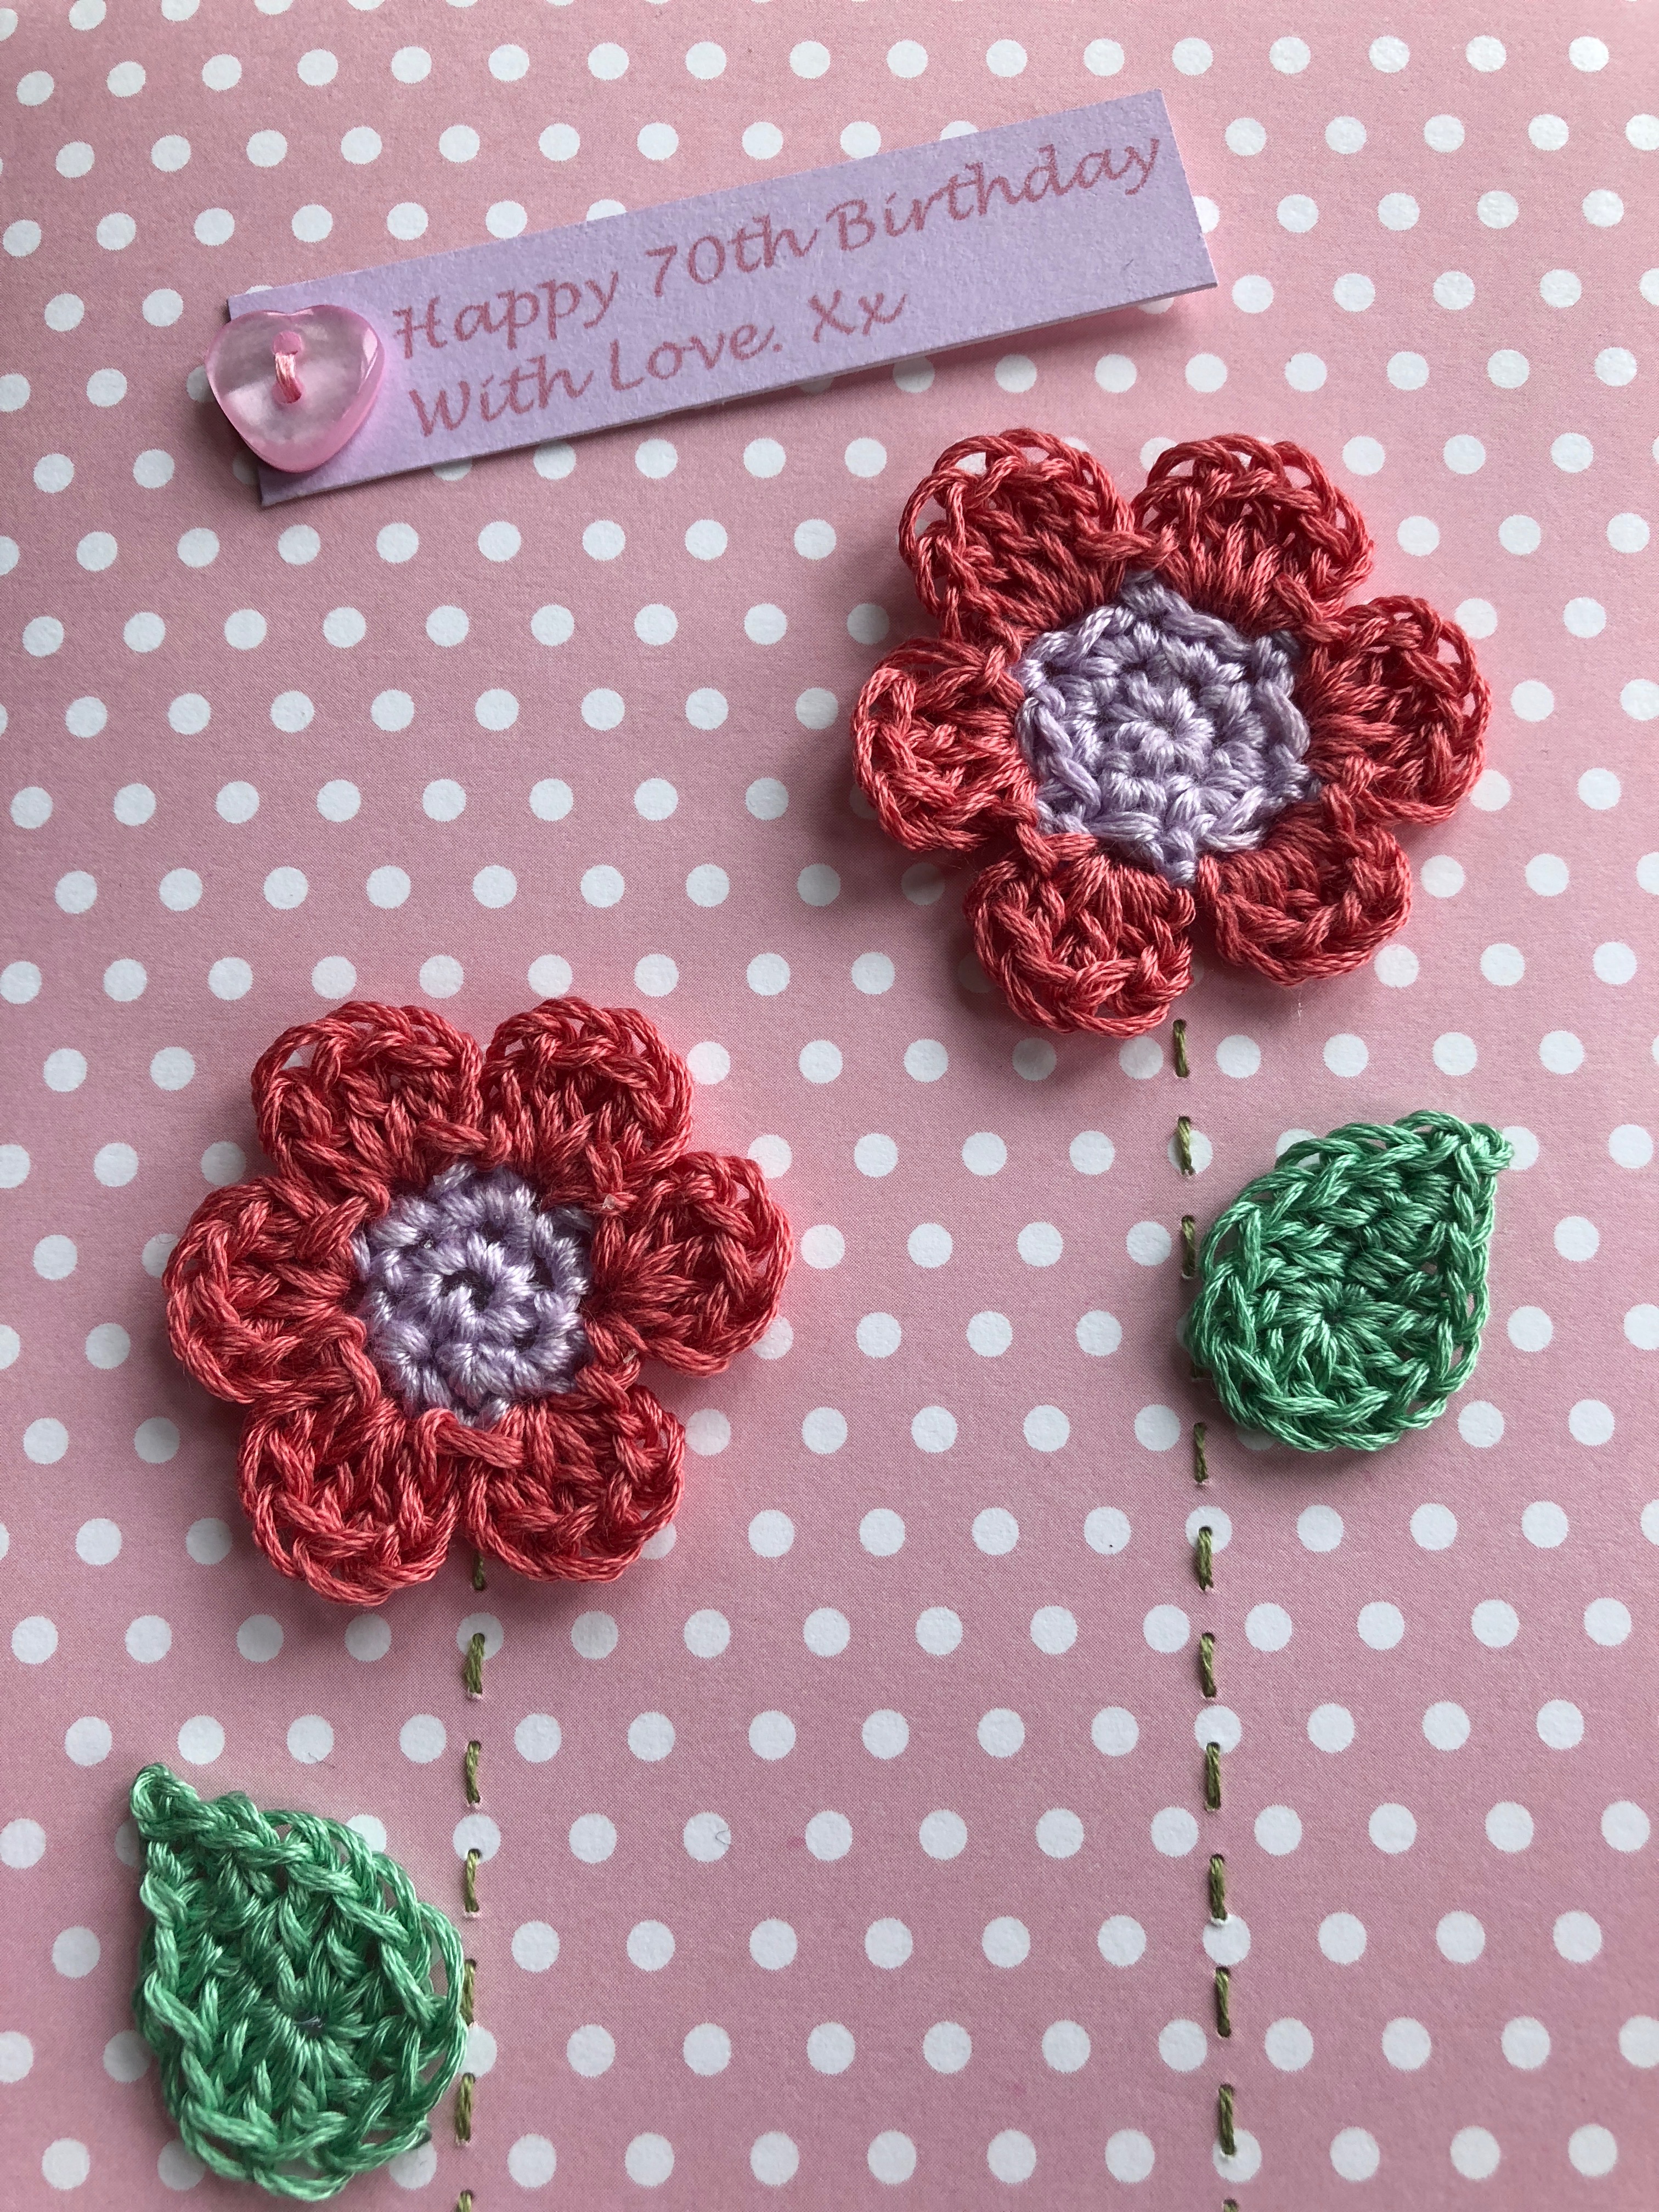 A handmade, crocheted and stitched card with two pink and lilac crocheted flowers with green crocheted leaves and a printed message with hand sewn button detail.